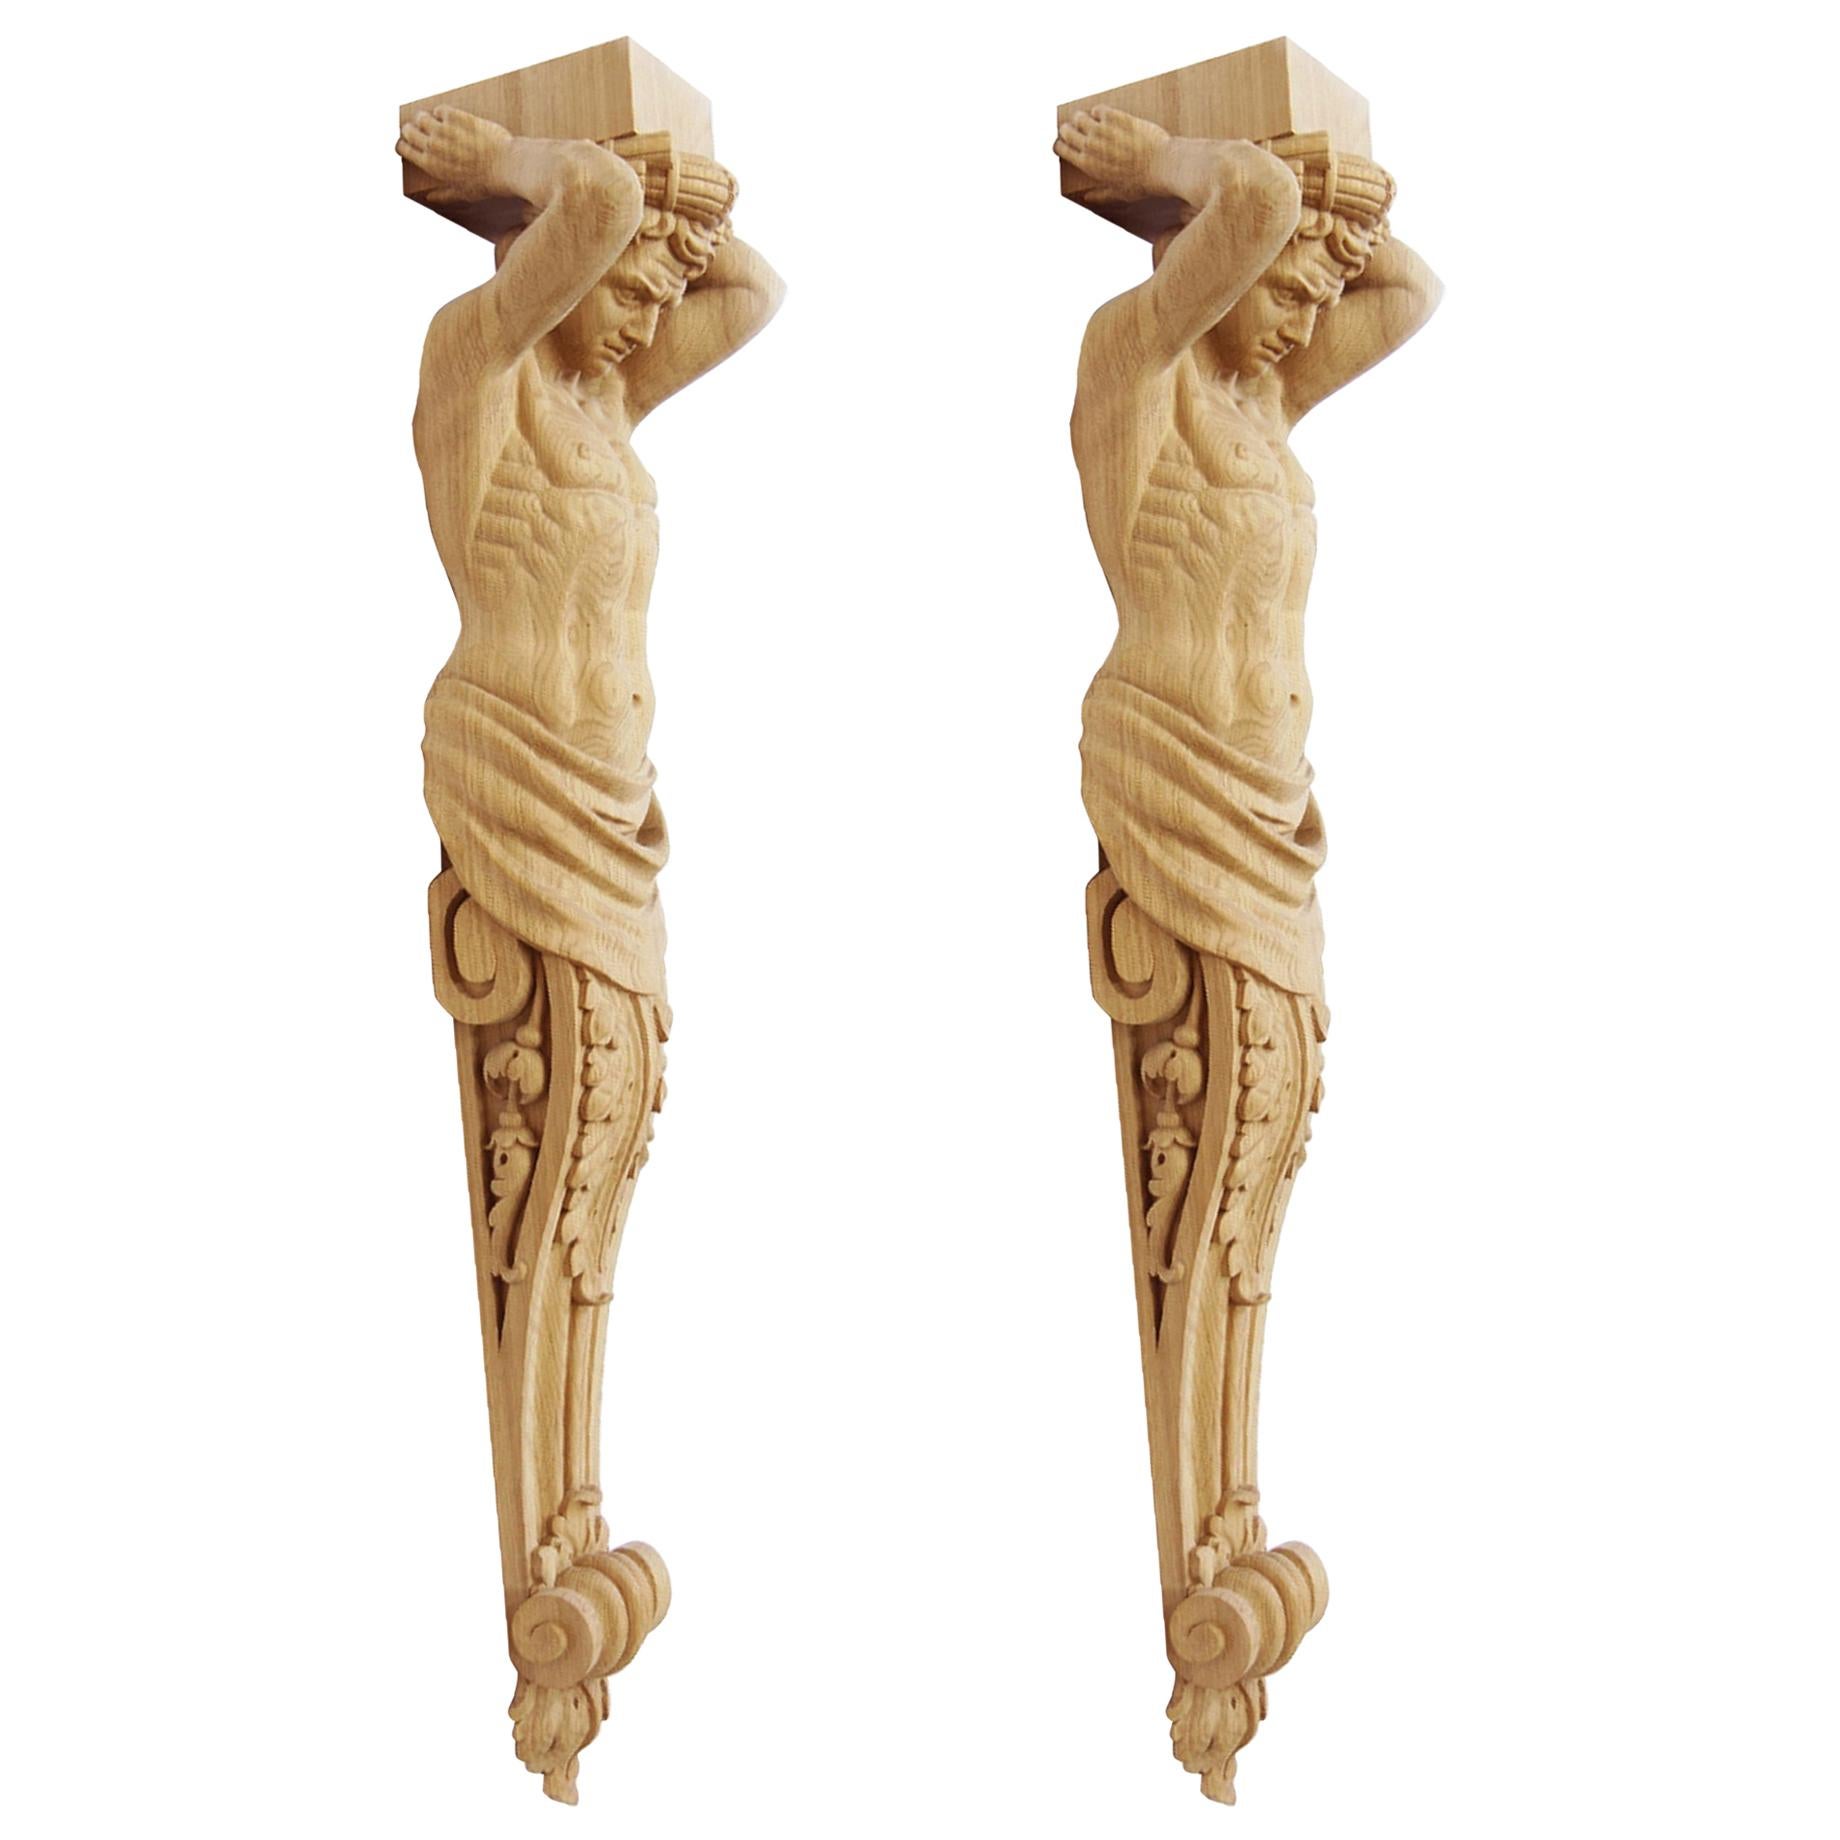 Pair of Carved Wooden Corbels "Atlant"